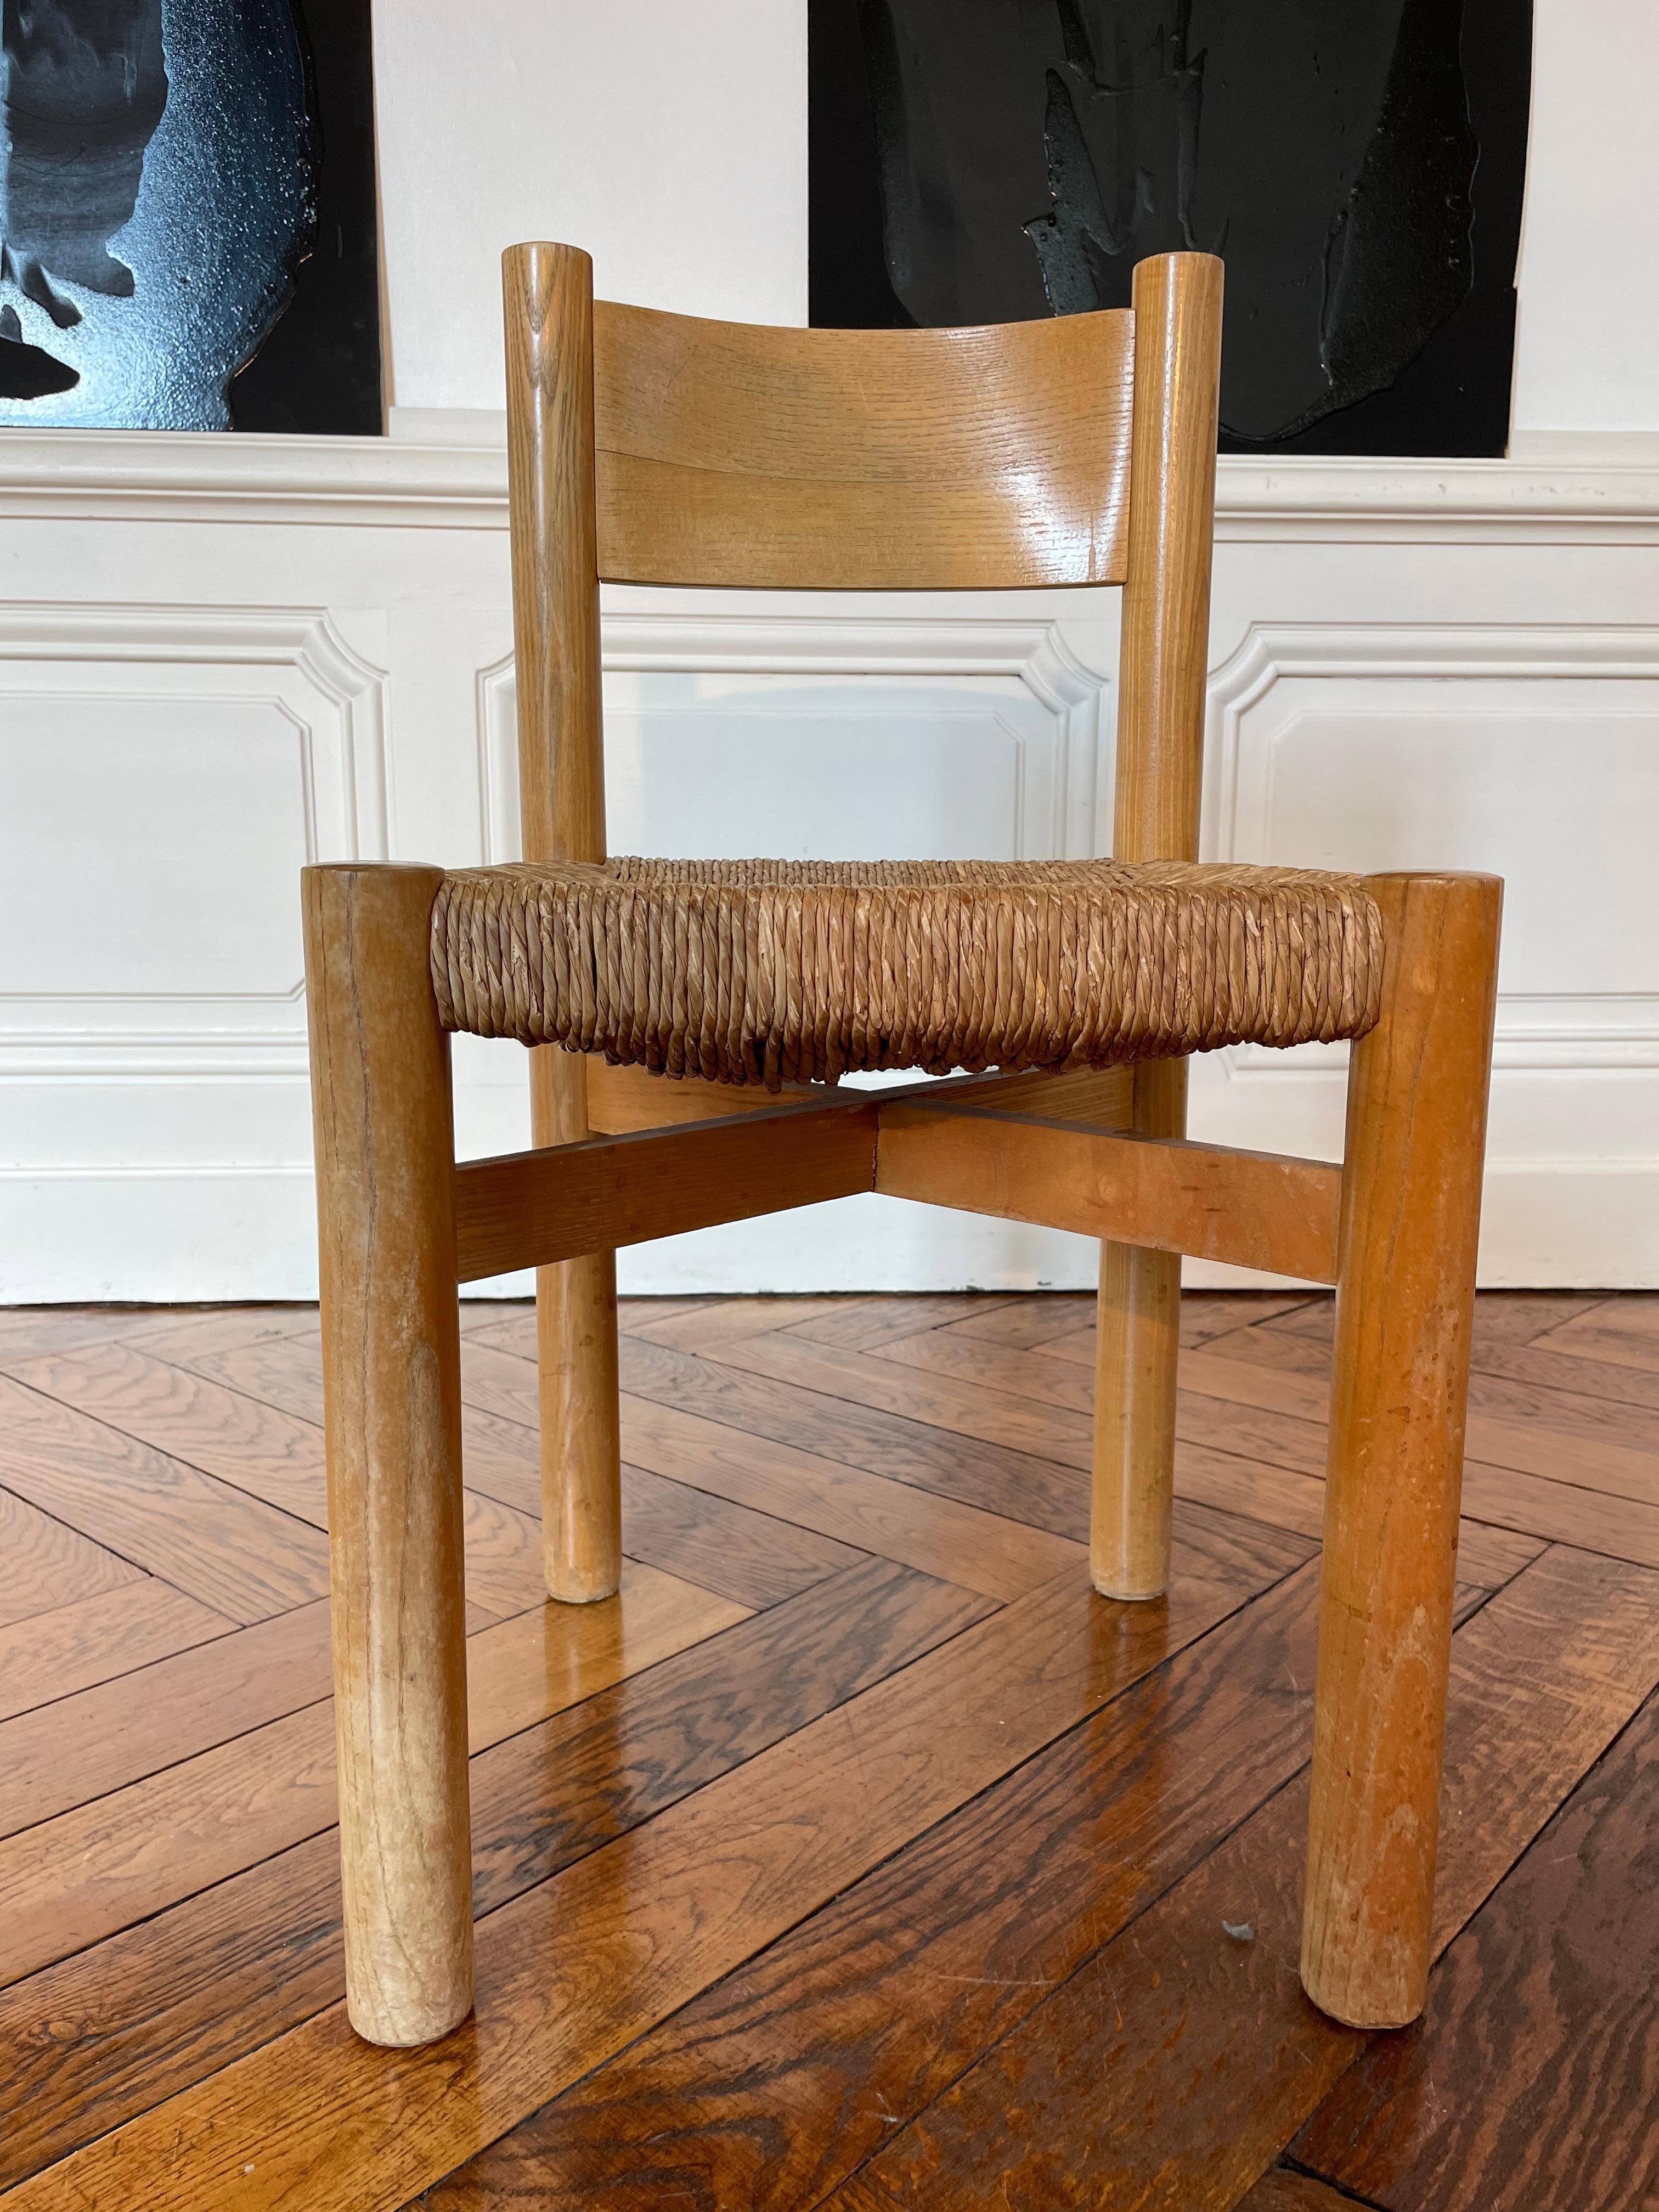 Straw chair Charlotte Perriand model Méribel 1950. chair with a beautiful patina with its original straw, which makes its value is rarity.